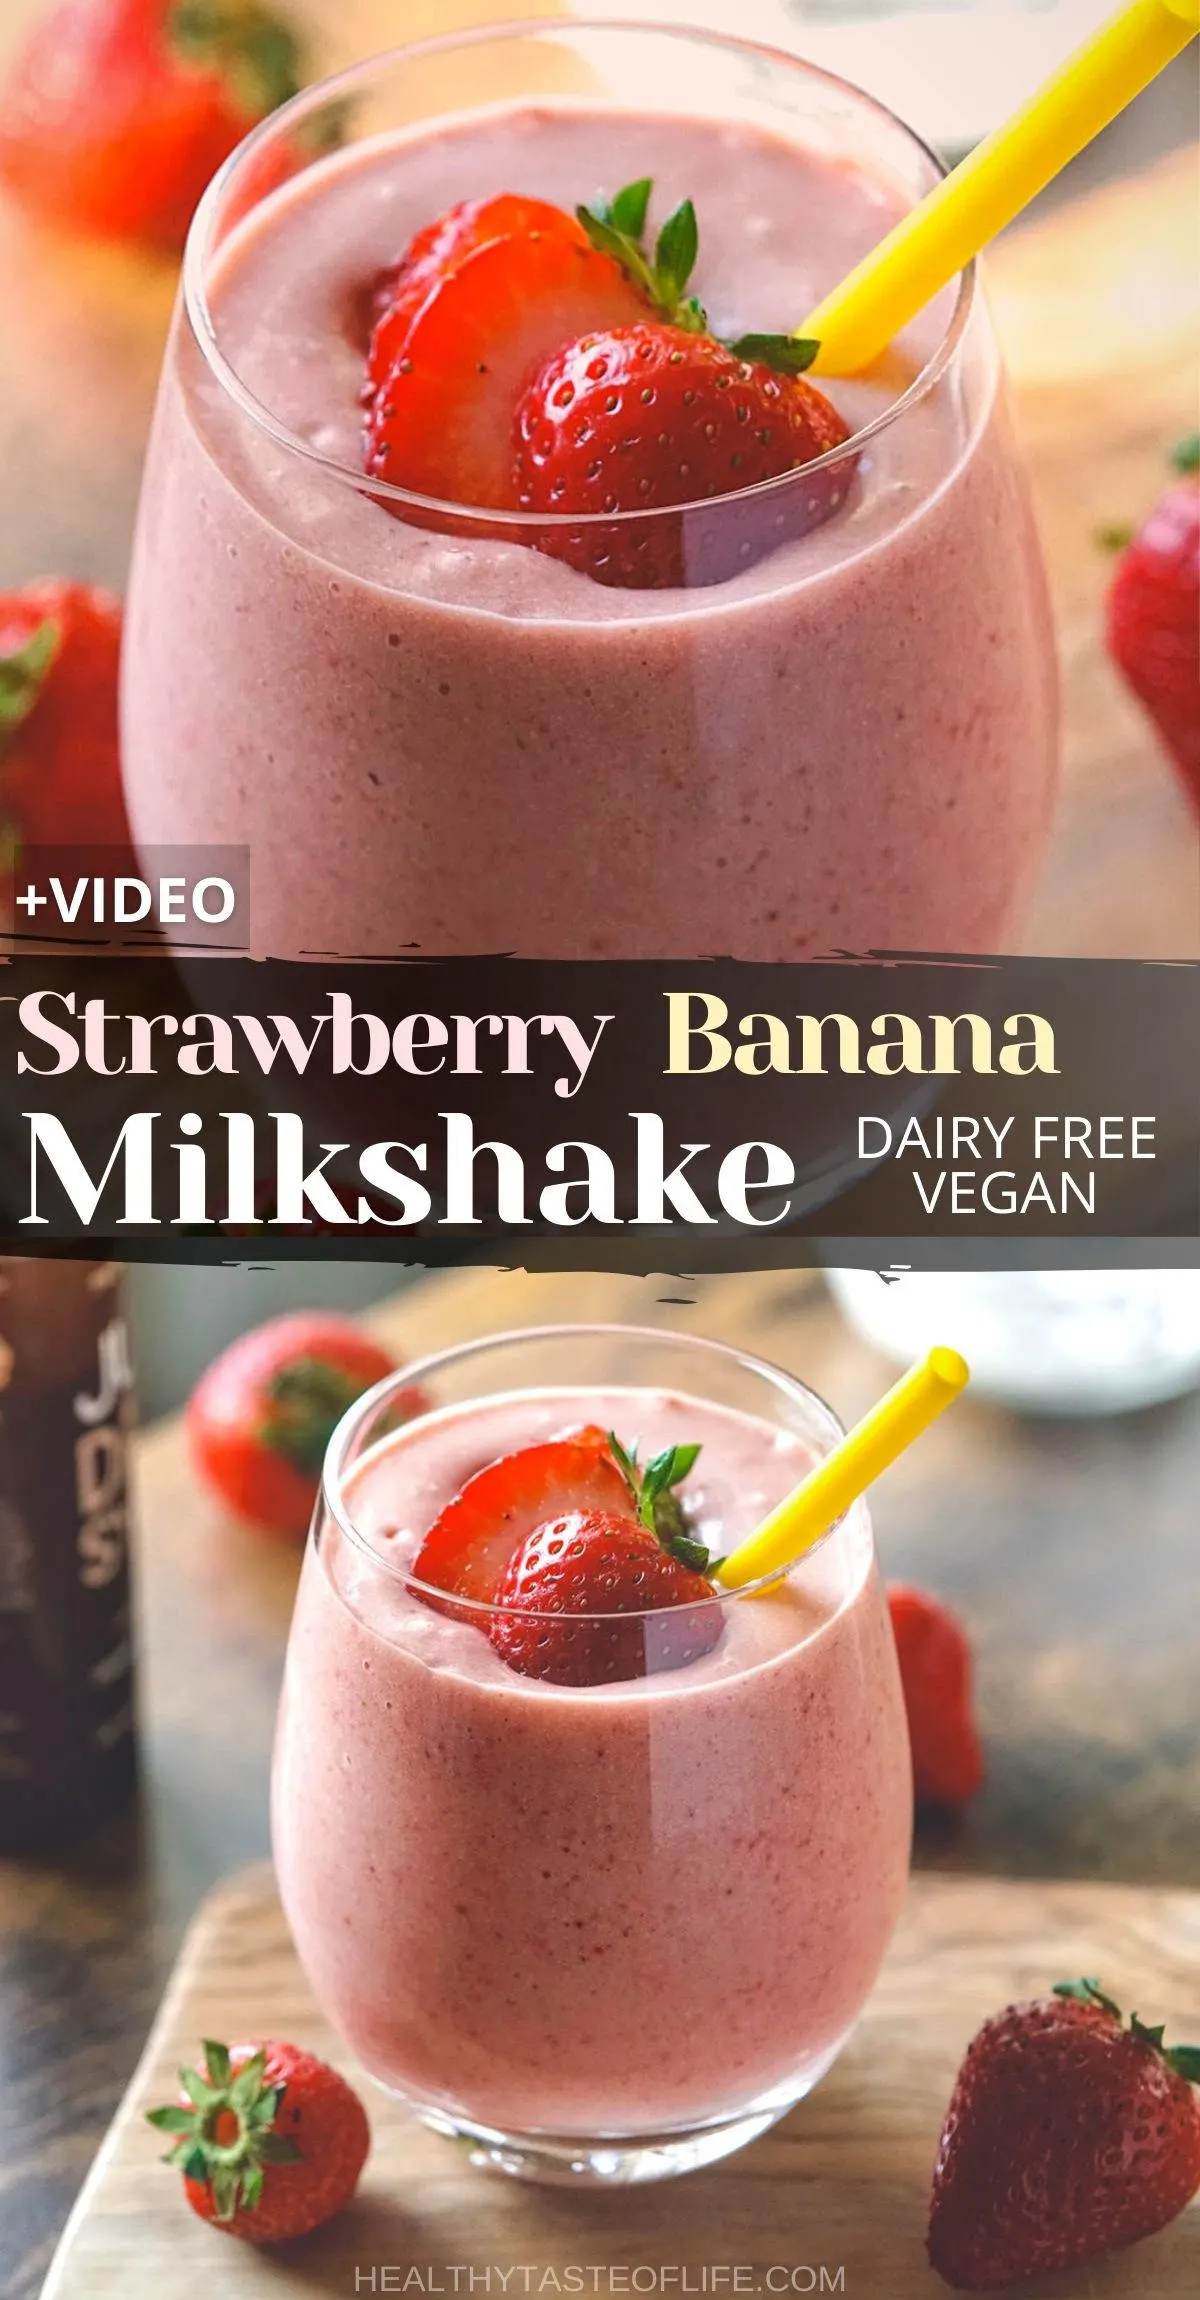 This is a strawberry banana milkshake that can be made with or without ice cream, or yogurt, it's up to you, you can easily customize it to be dairy free and vegan friendly. A thick creamy cold strawberry milkshake dessert flavored with real strawberries and banana perfect for hot summer days. Also check out what to add to make this a healthy strawberry milkshake. #strawberrymilkshake #strawberry #banana #milkshake